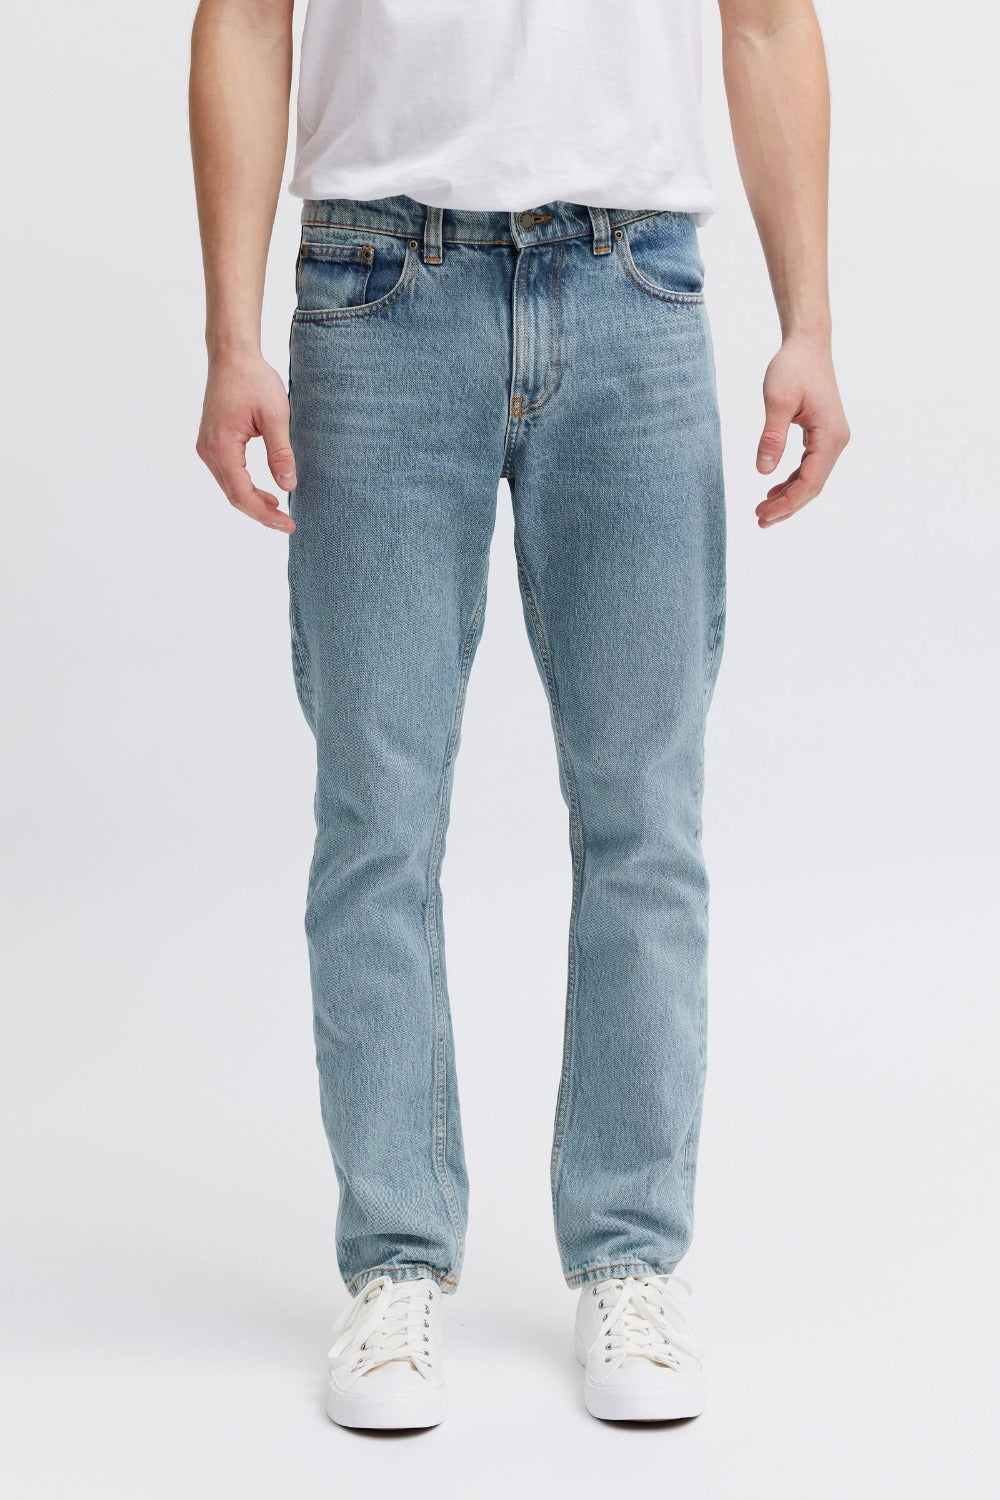 Lease Jeans for Men